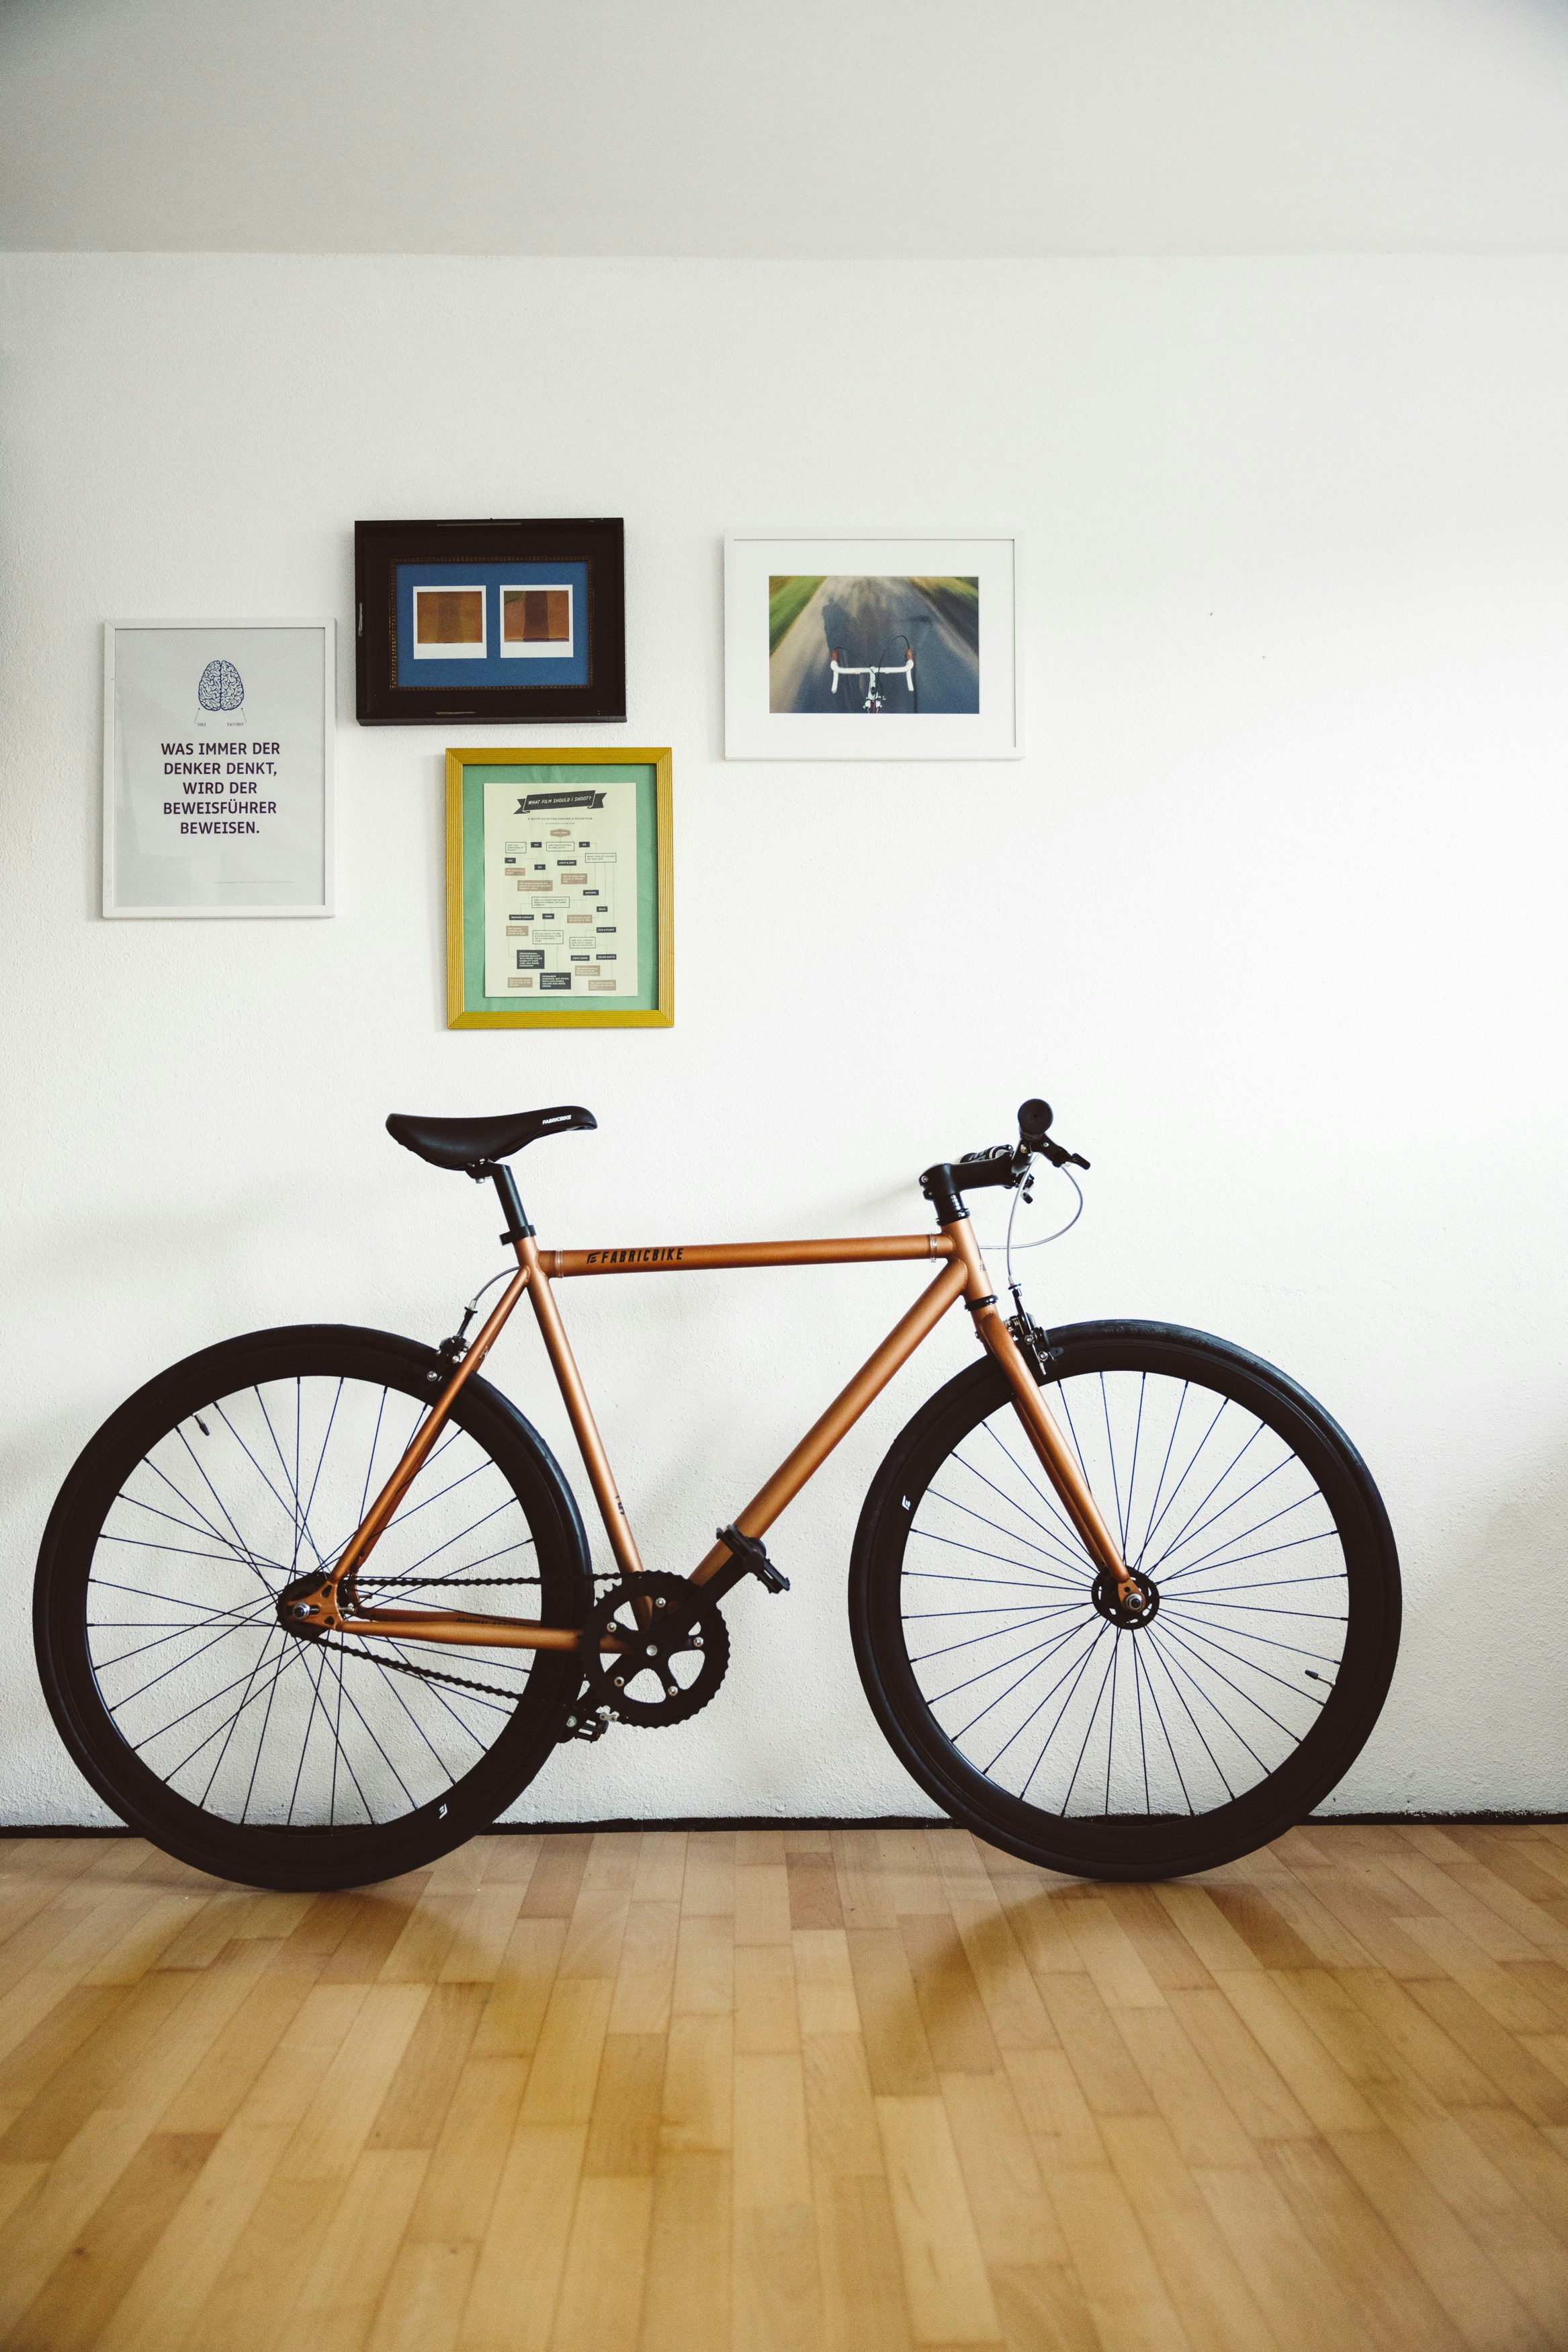 Creative graphic designer coworking space with a fixie bike